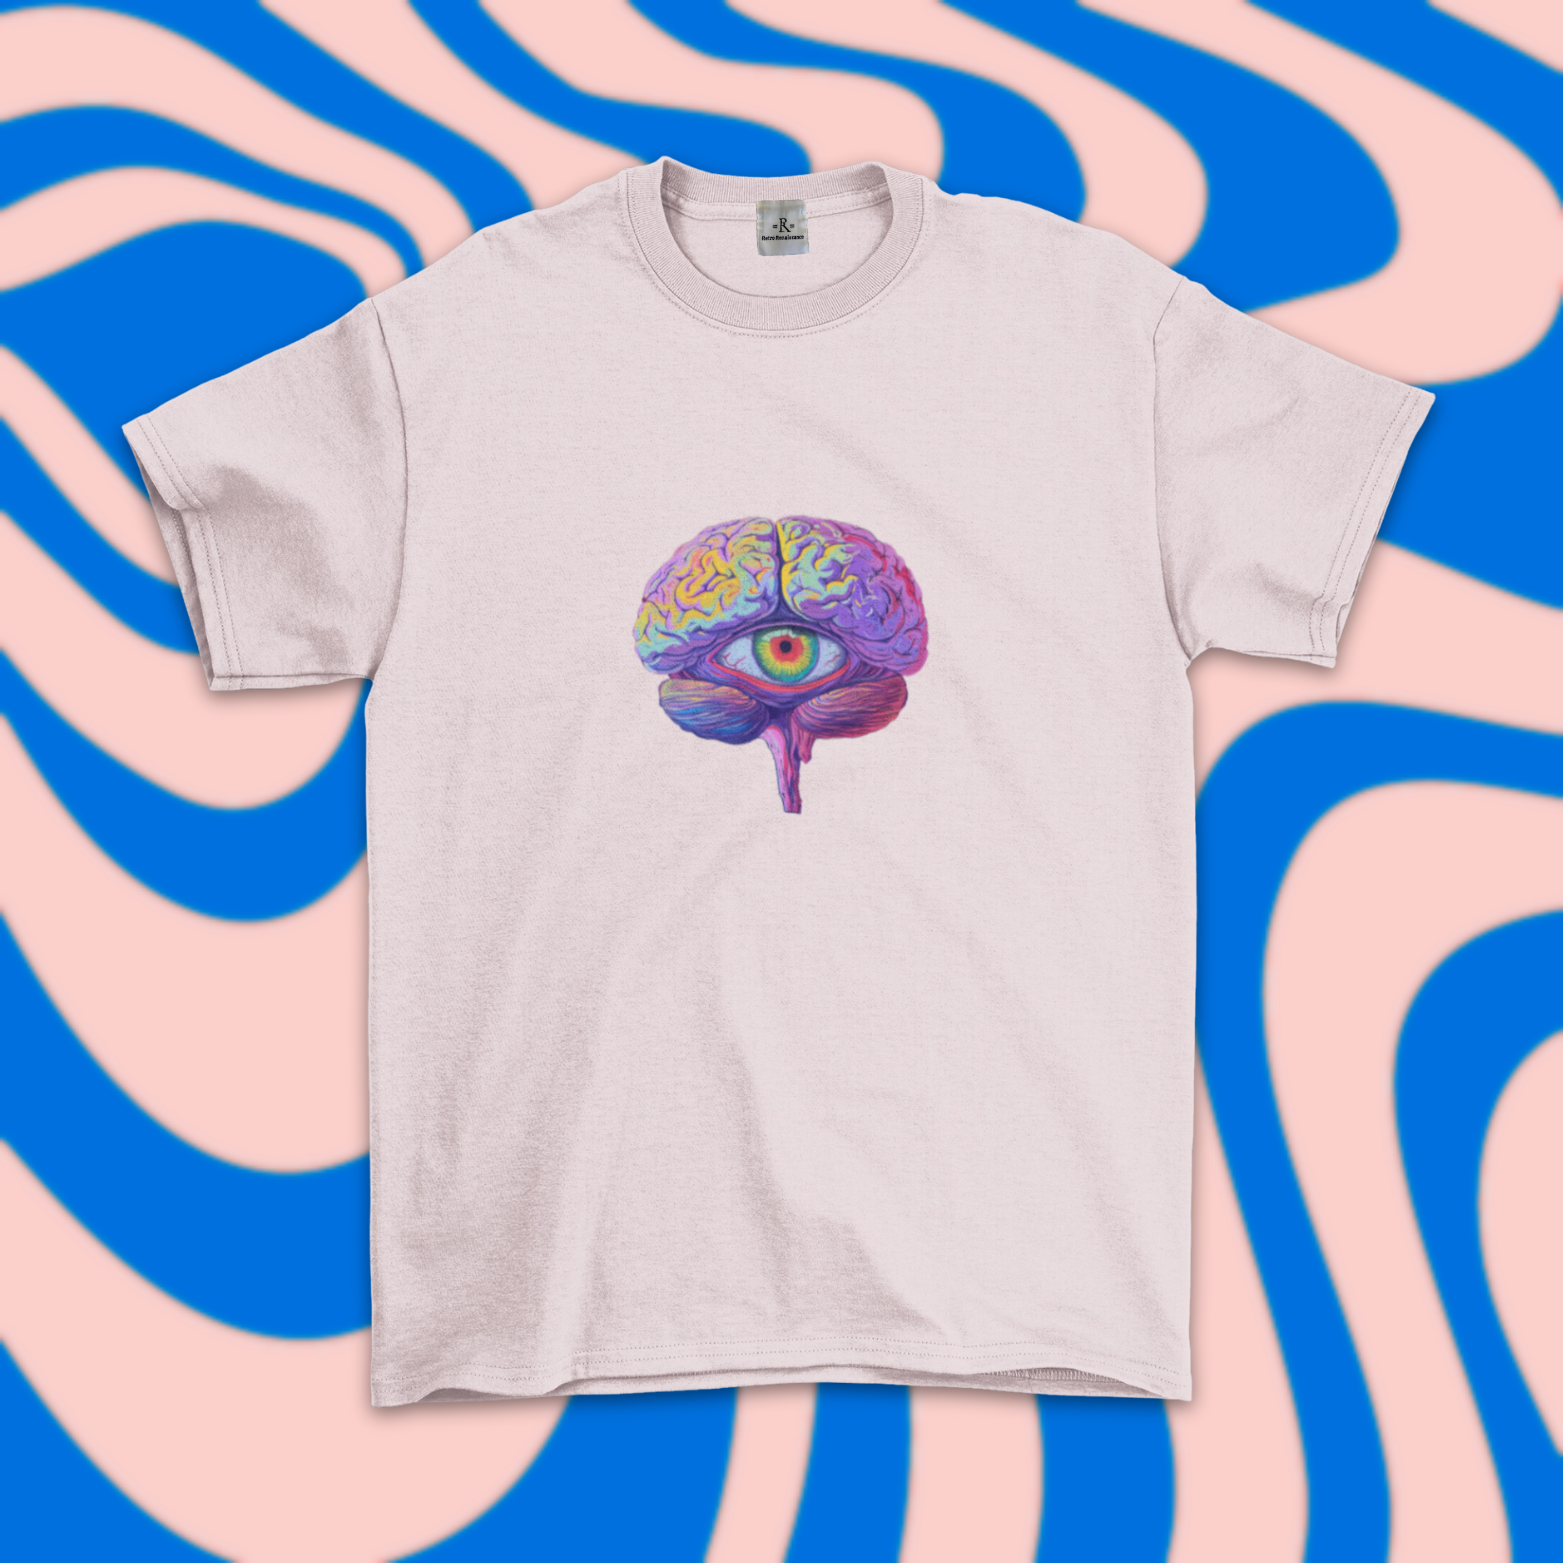 Retro Renaissance Psychedelic Tee, The Mind's Eye